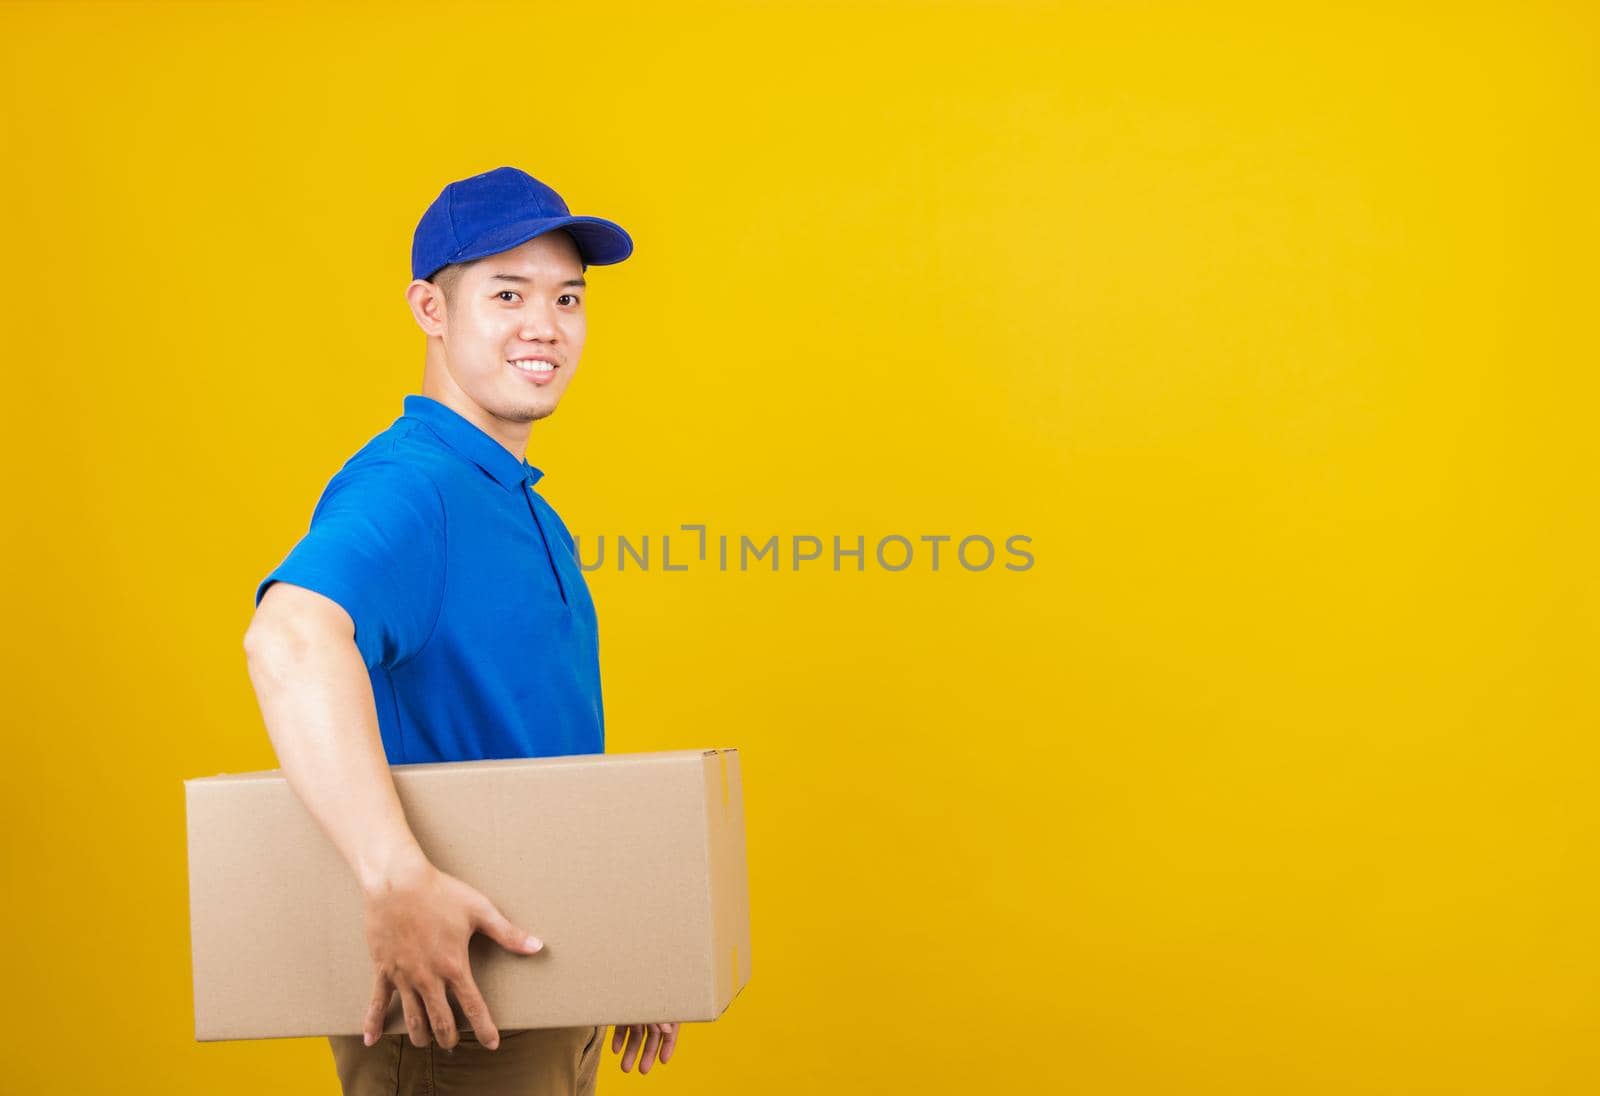 Portrait excited attractive delivery happy man logistic standing smile wearing blue t-shirt and cap uniform holding parcel box looking to camera, studio shot isolated on yellow background, side view